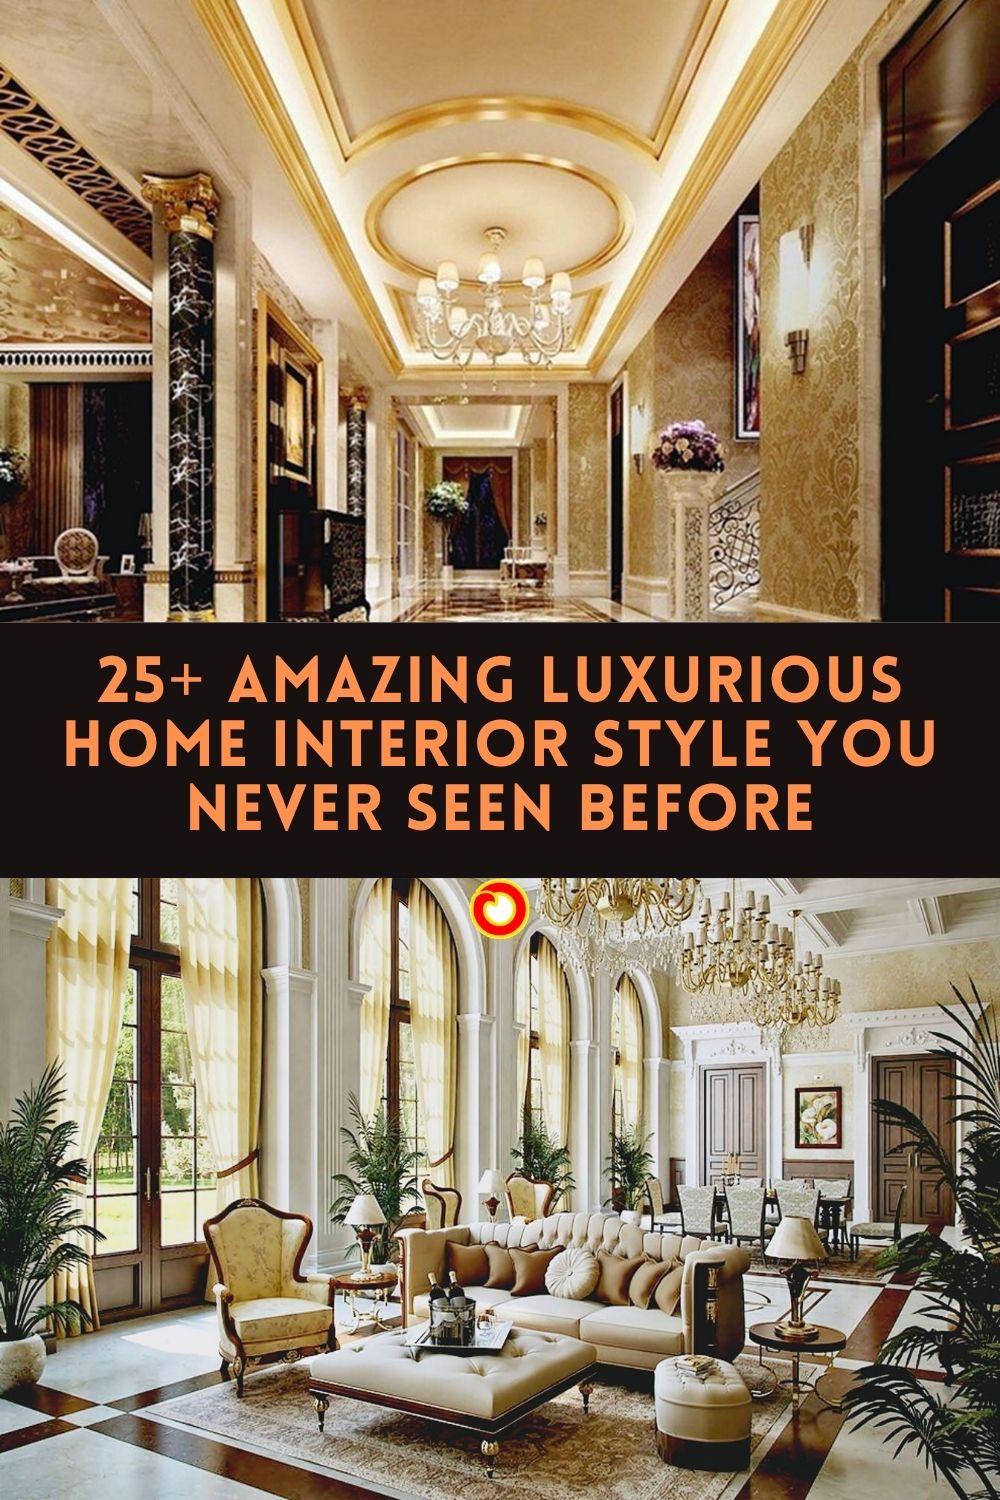 25 Amazing Luxurious Home Interior Style You Never Seen Before